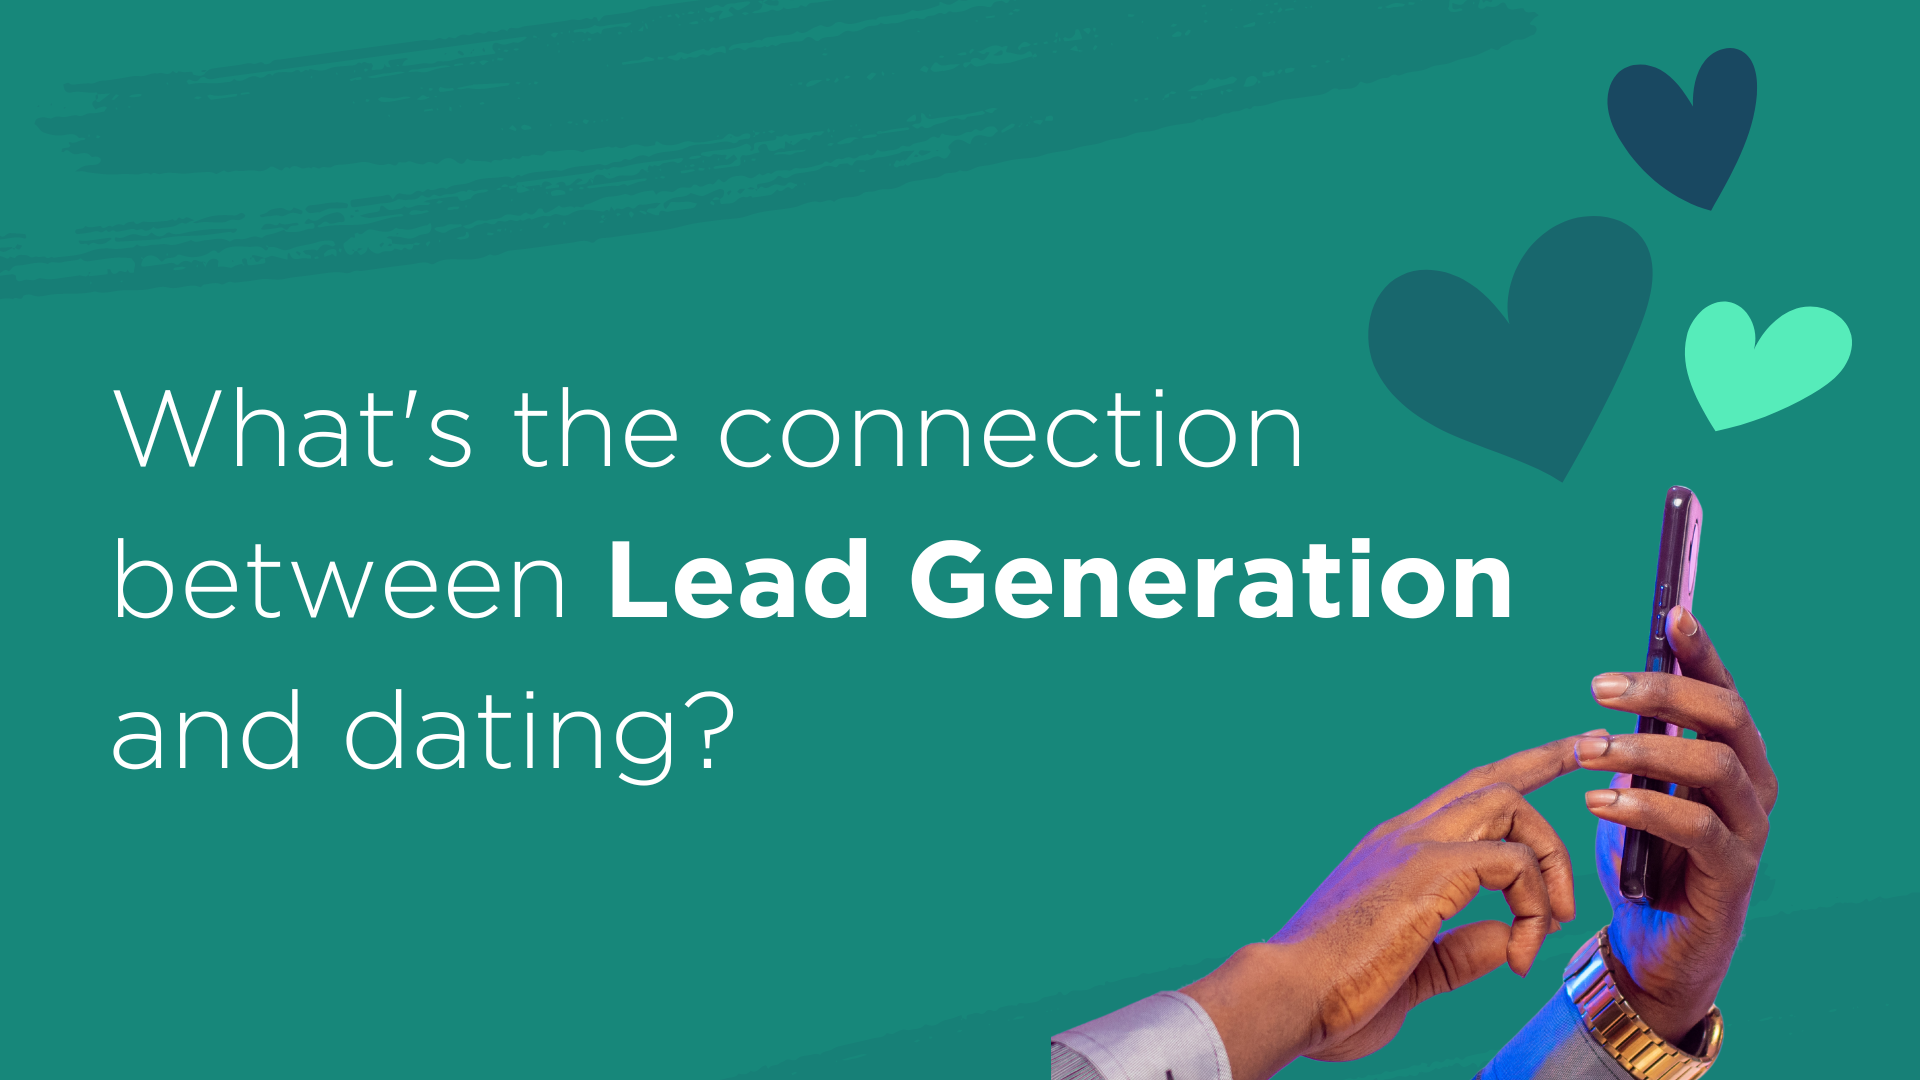 What's the connection between Lead Generation and Dating?